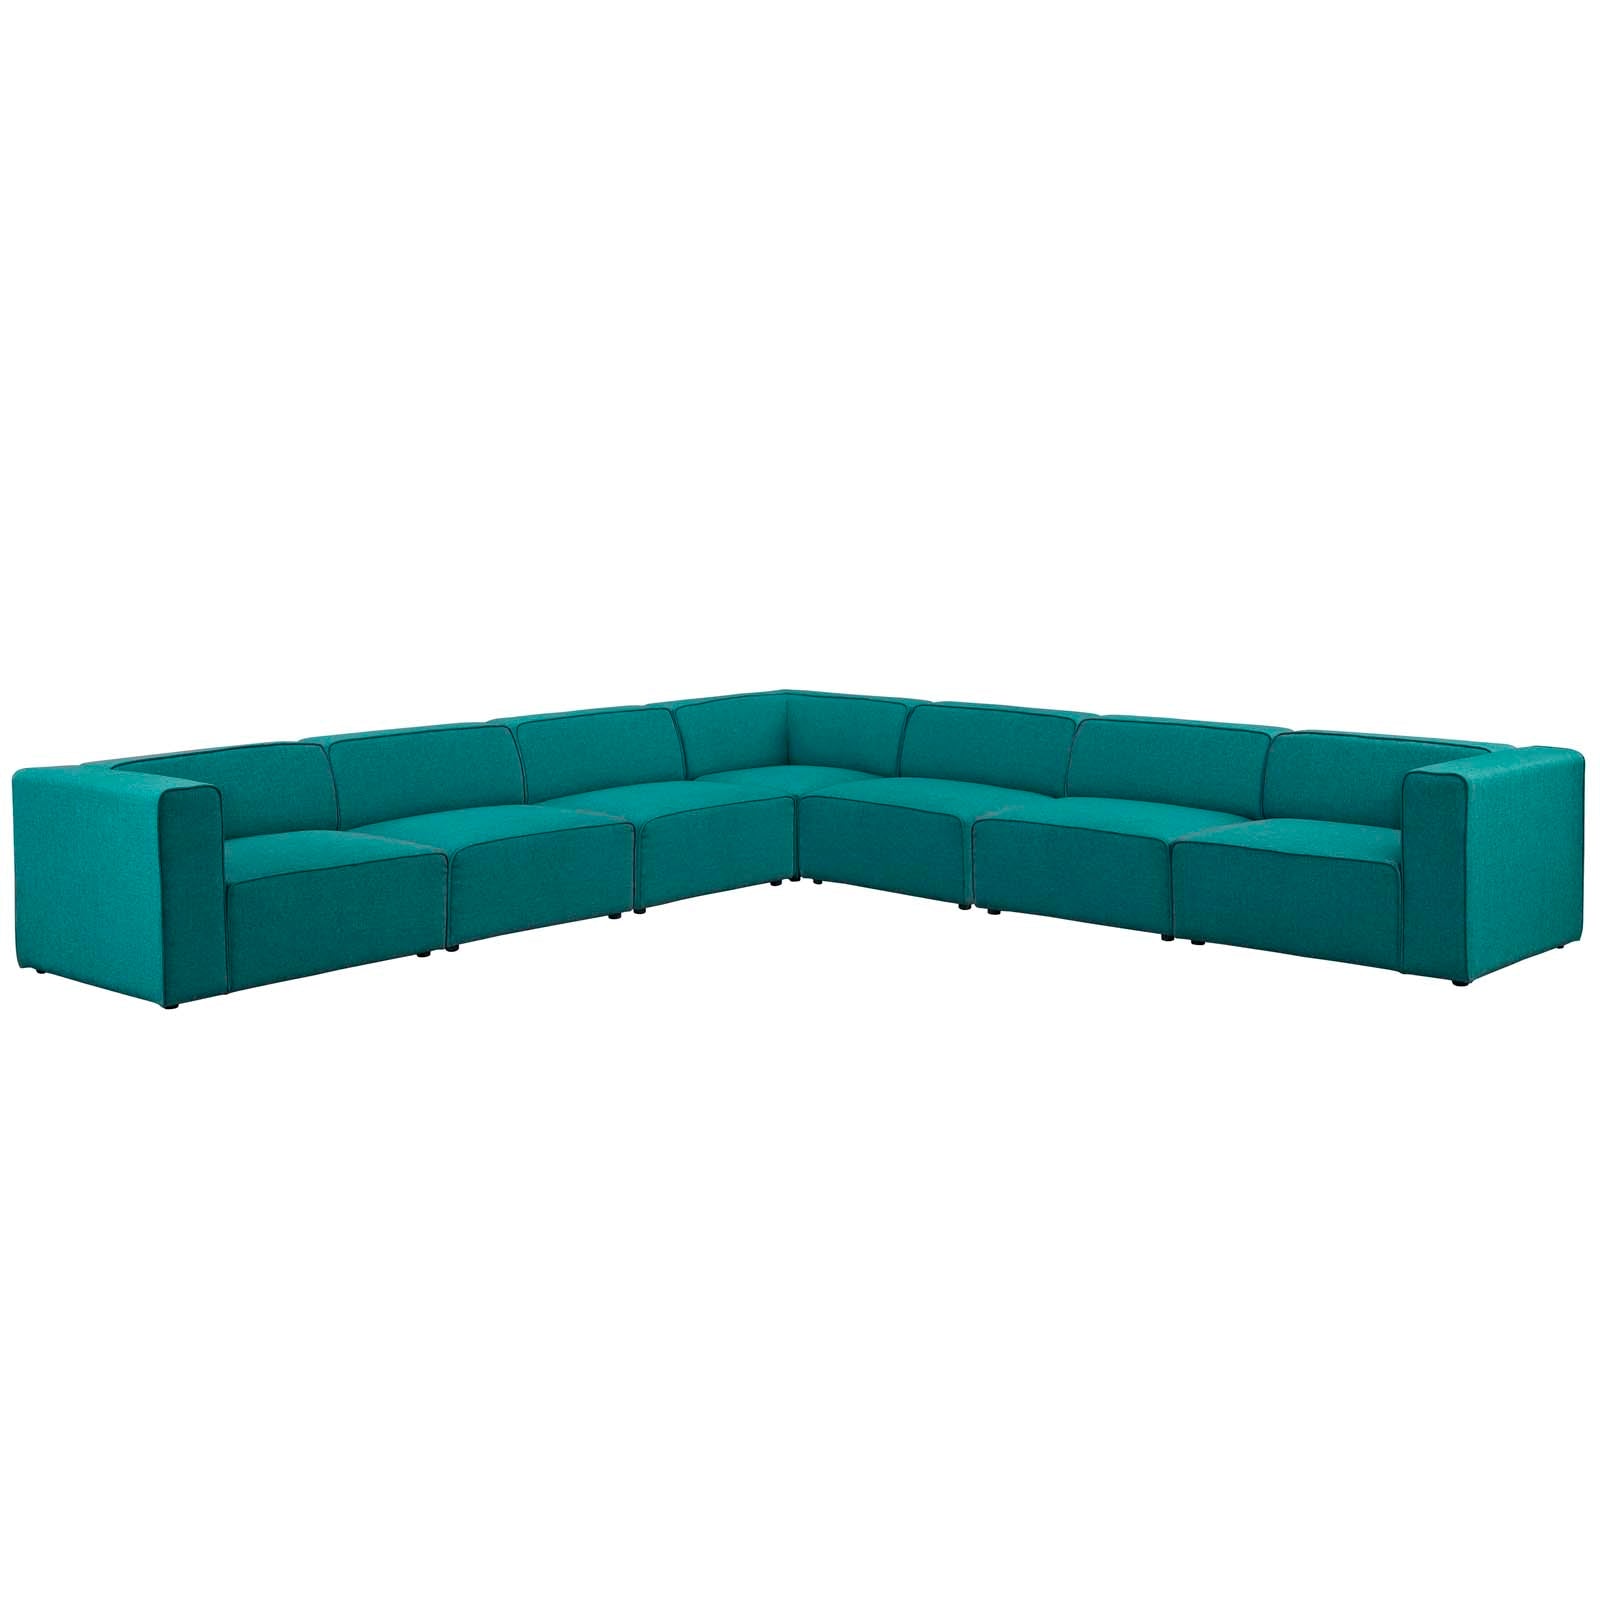 Modway Sectional Sofas - Mingle 7 Piece Upholstered 149.5"W Fabric Sectional Sofa Set Teal